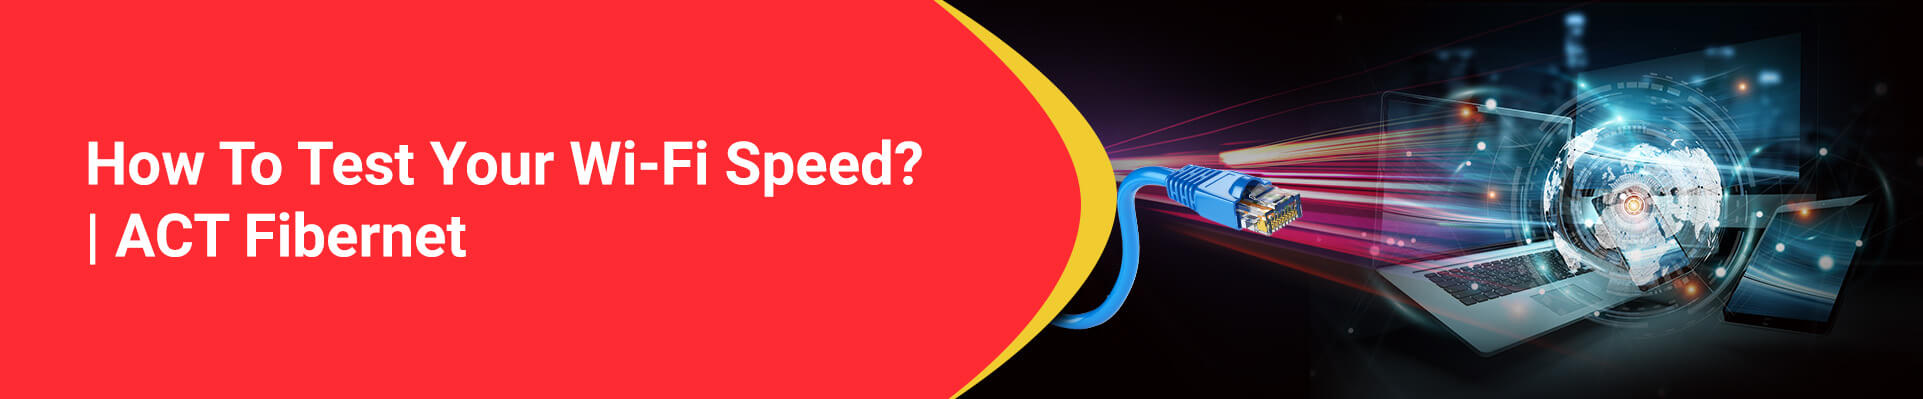 How To Test Your Wi-Fi Speed?